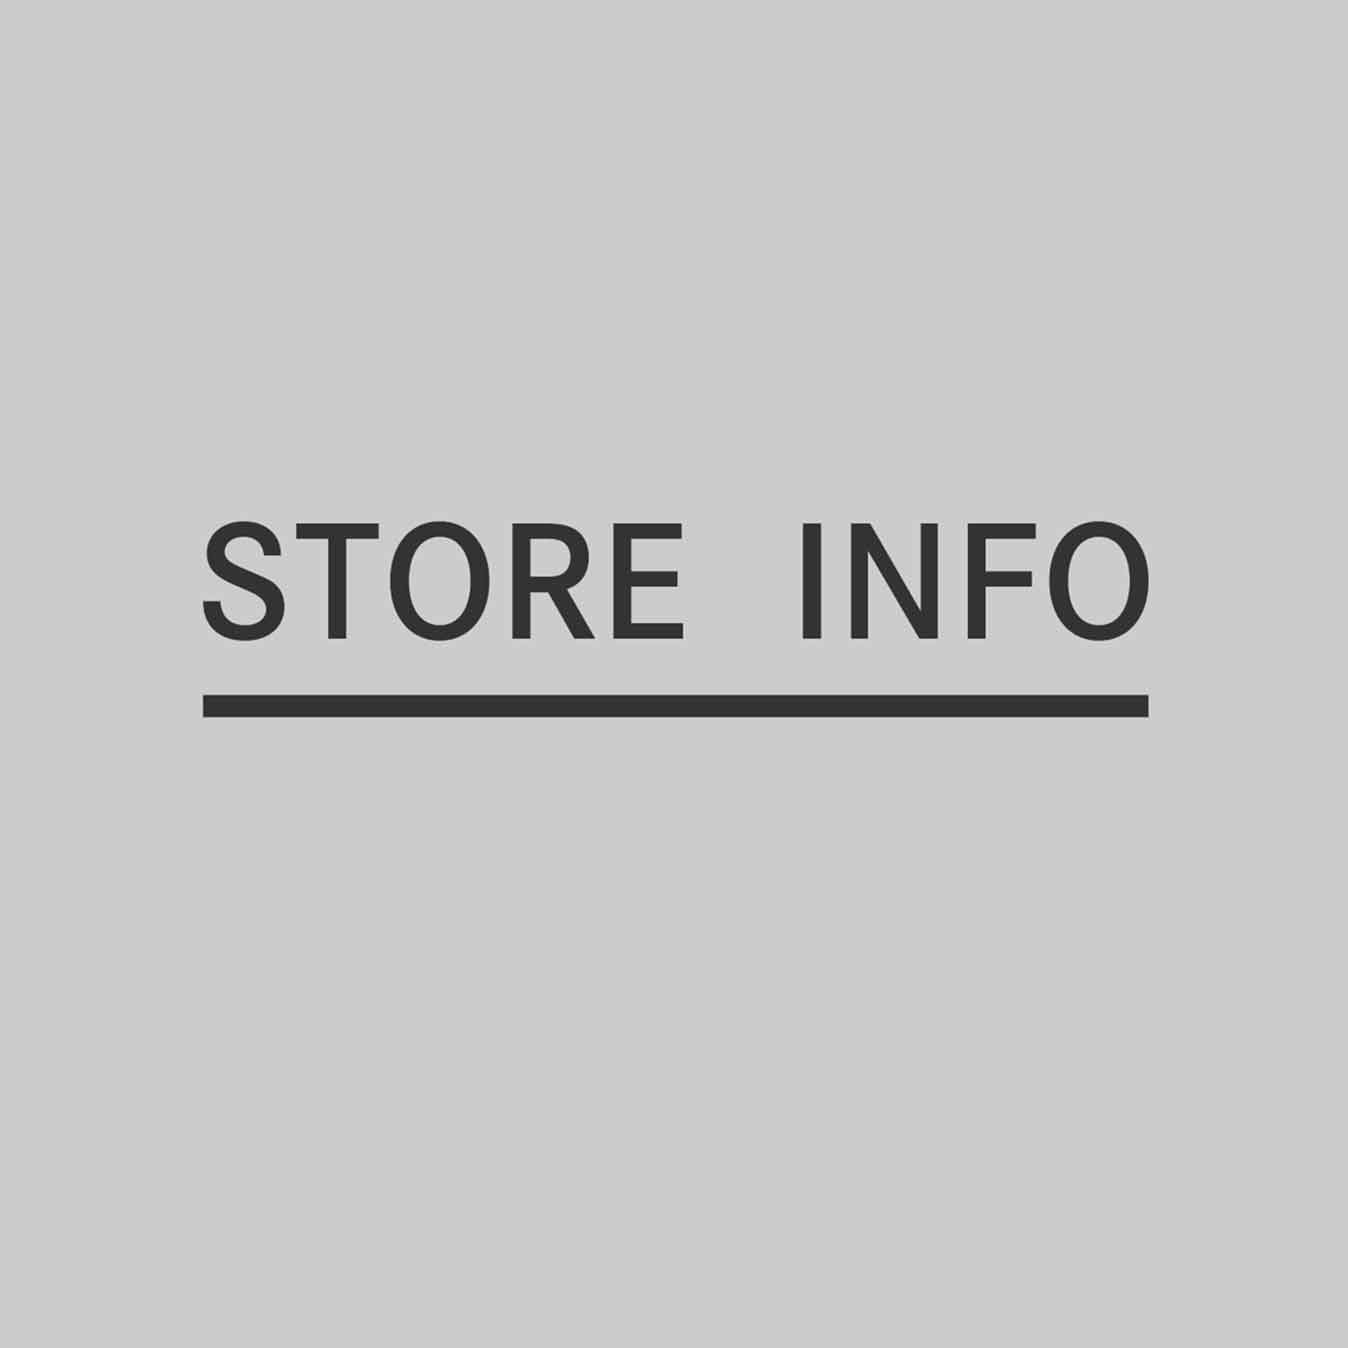 This is a image of Online Store Information